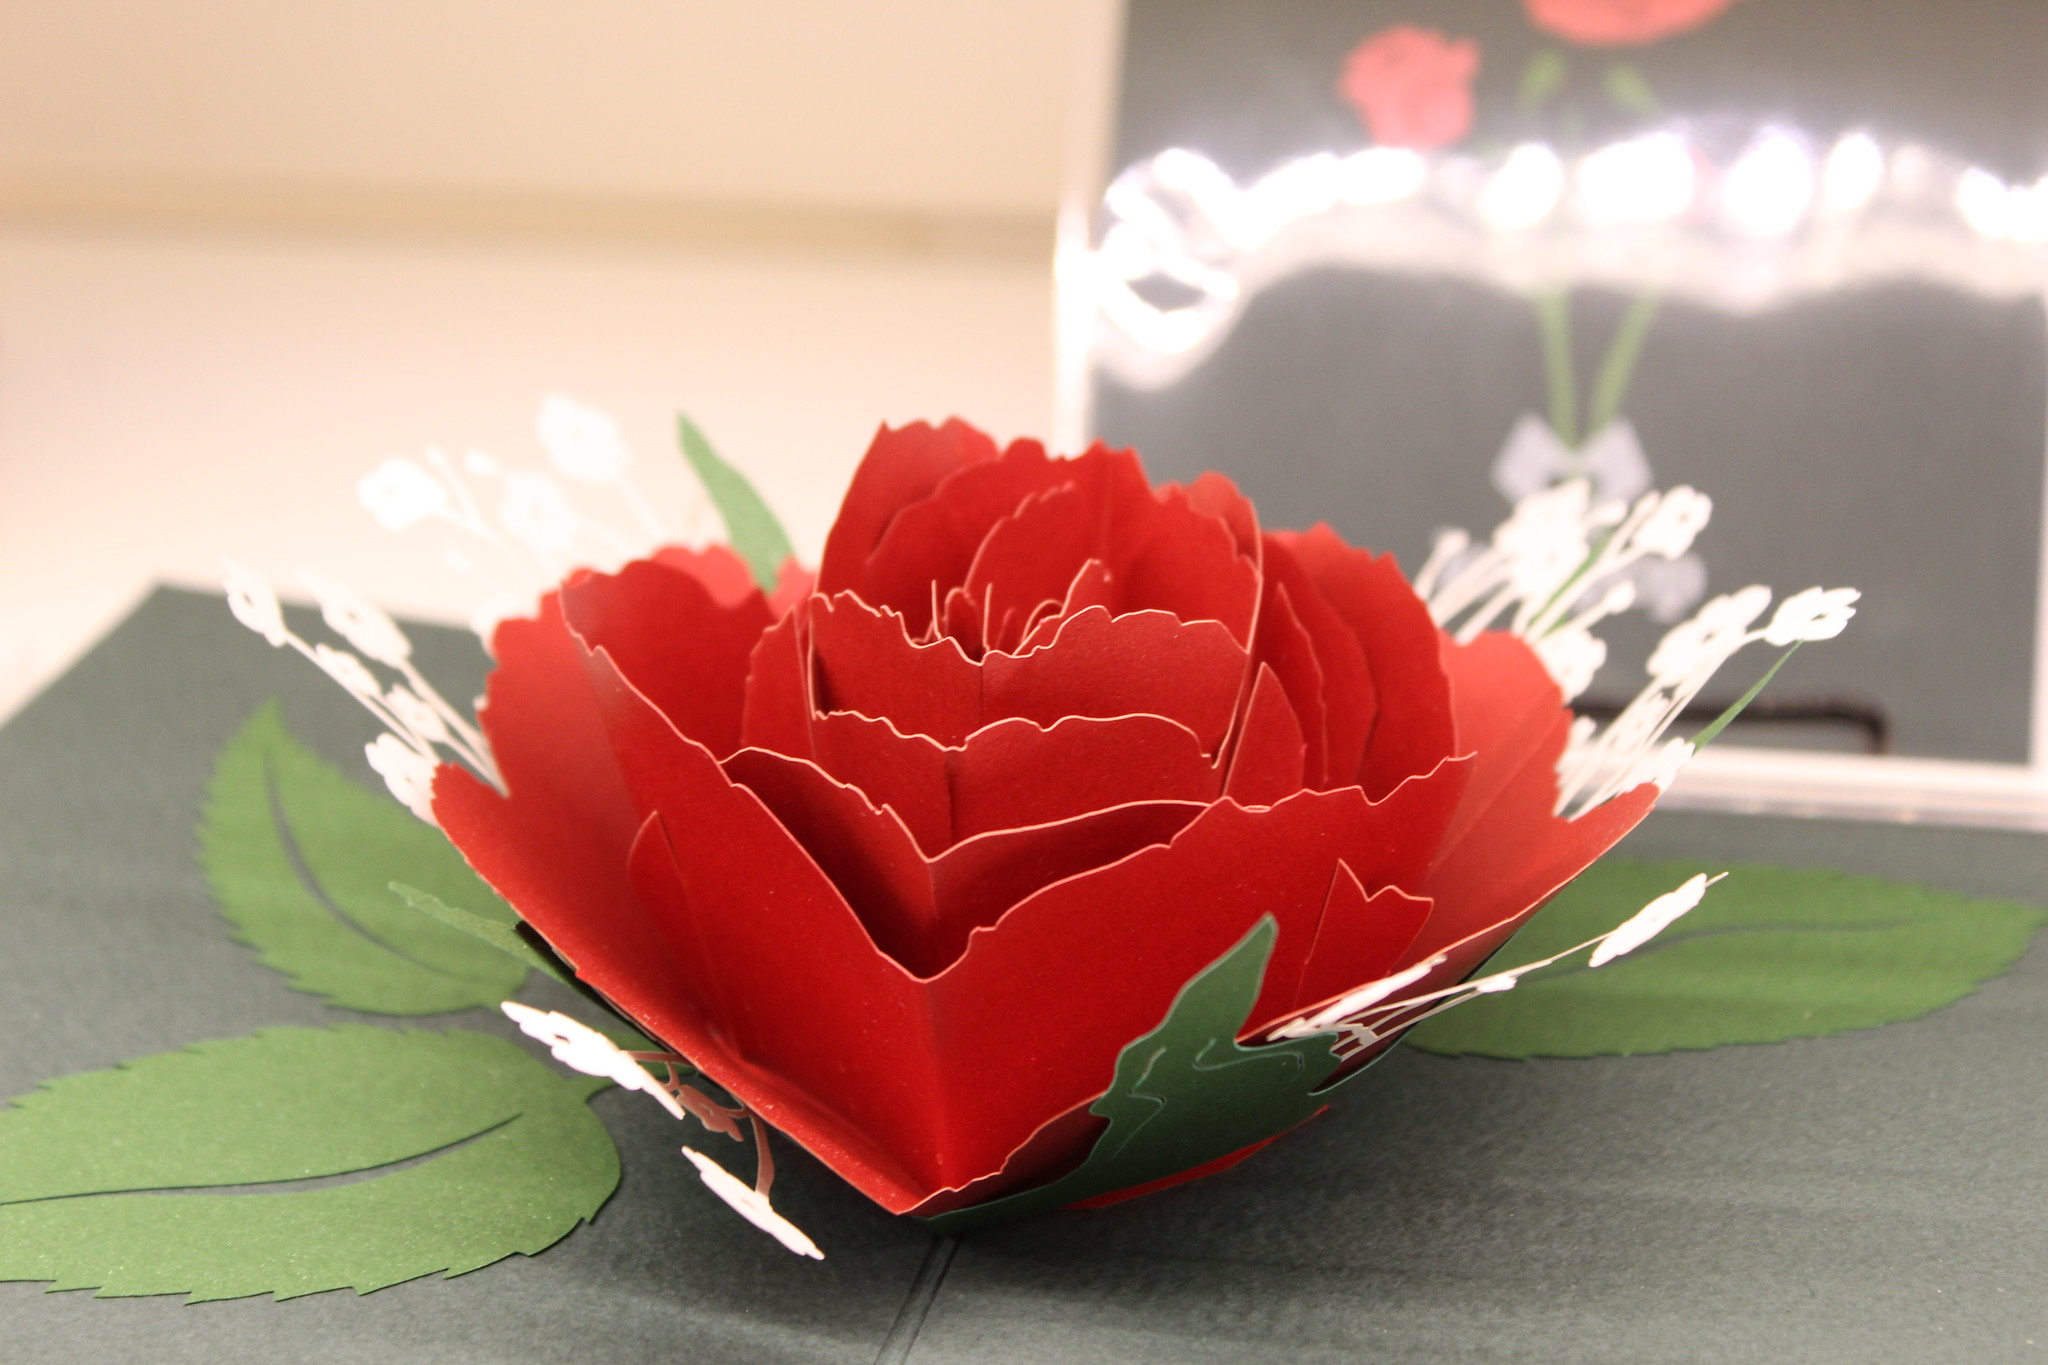 Diy mother's day gifts flower pop up card by Alexander Alzona in Flickr